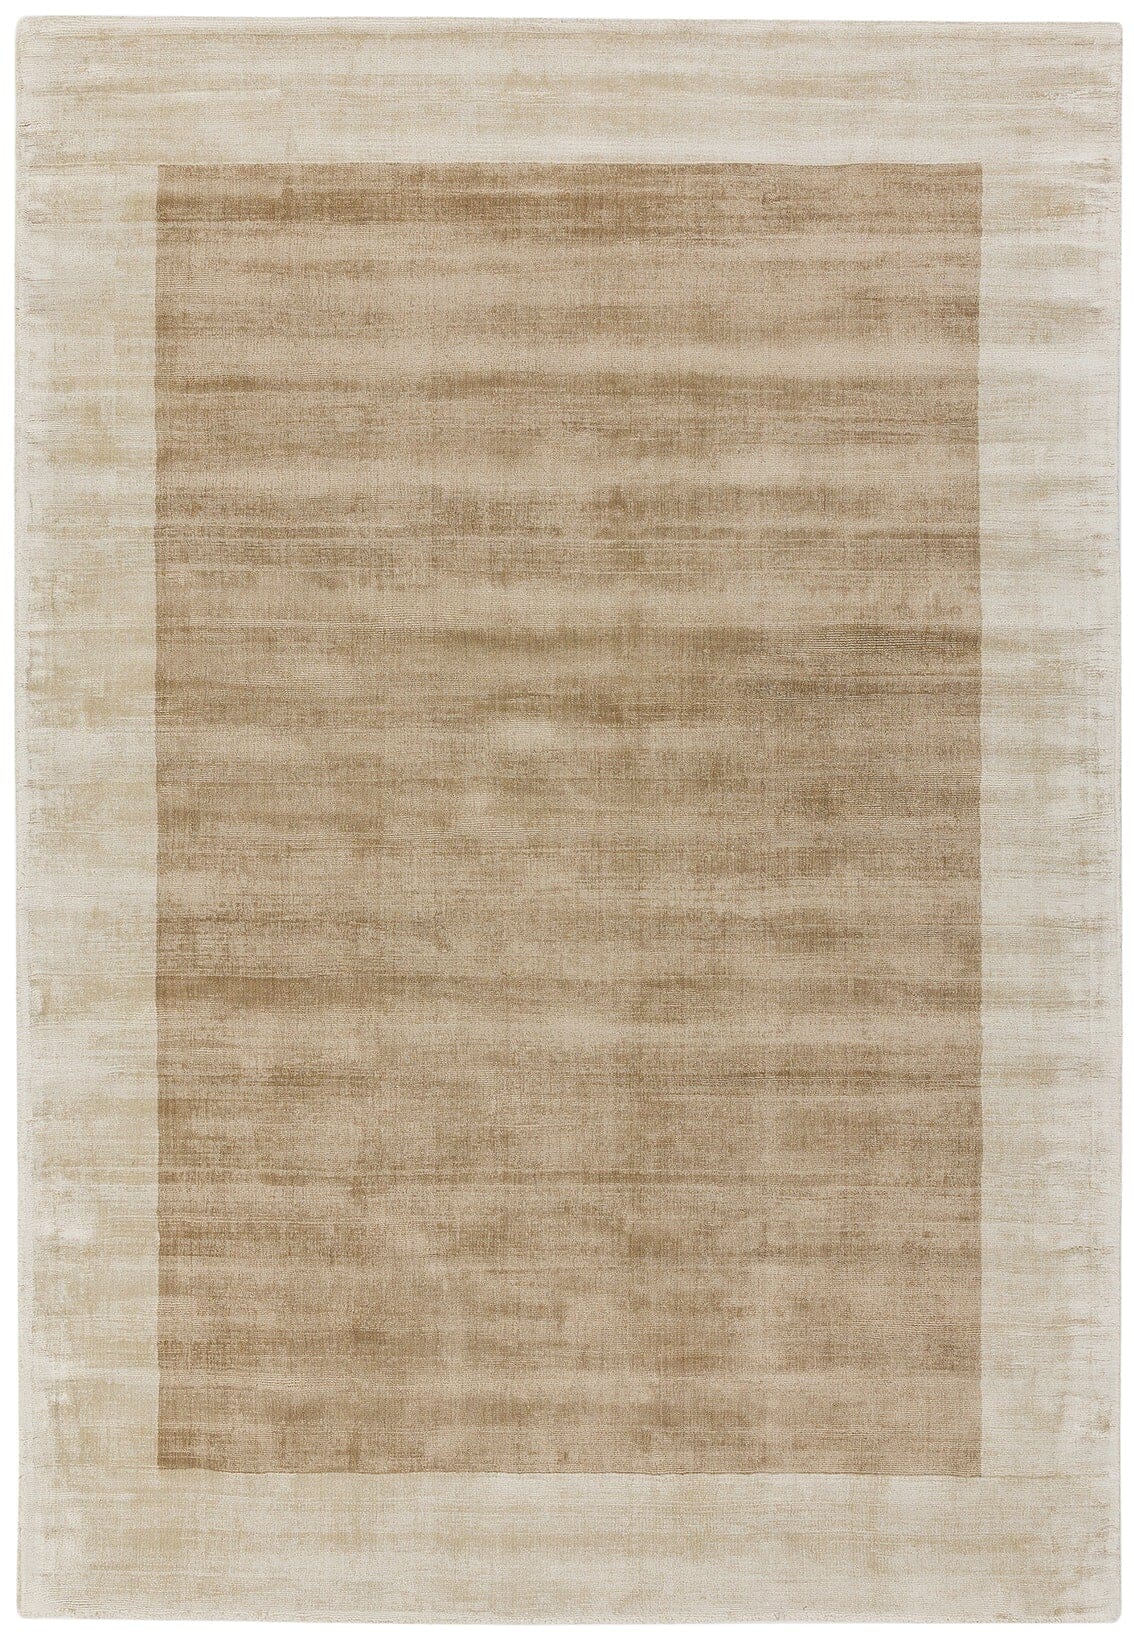 Asiatic Carpets Blade Hand Woven Rug Putty Champagne - 200 x 200cm